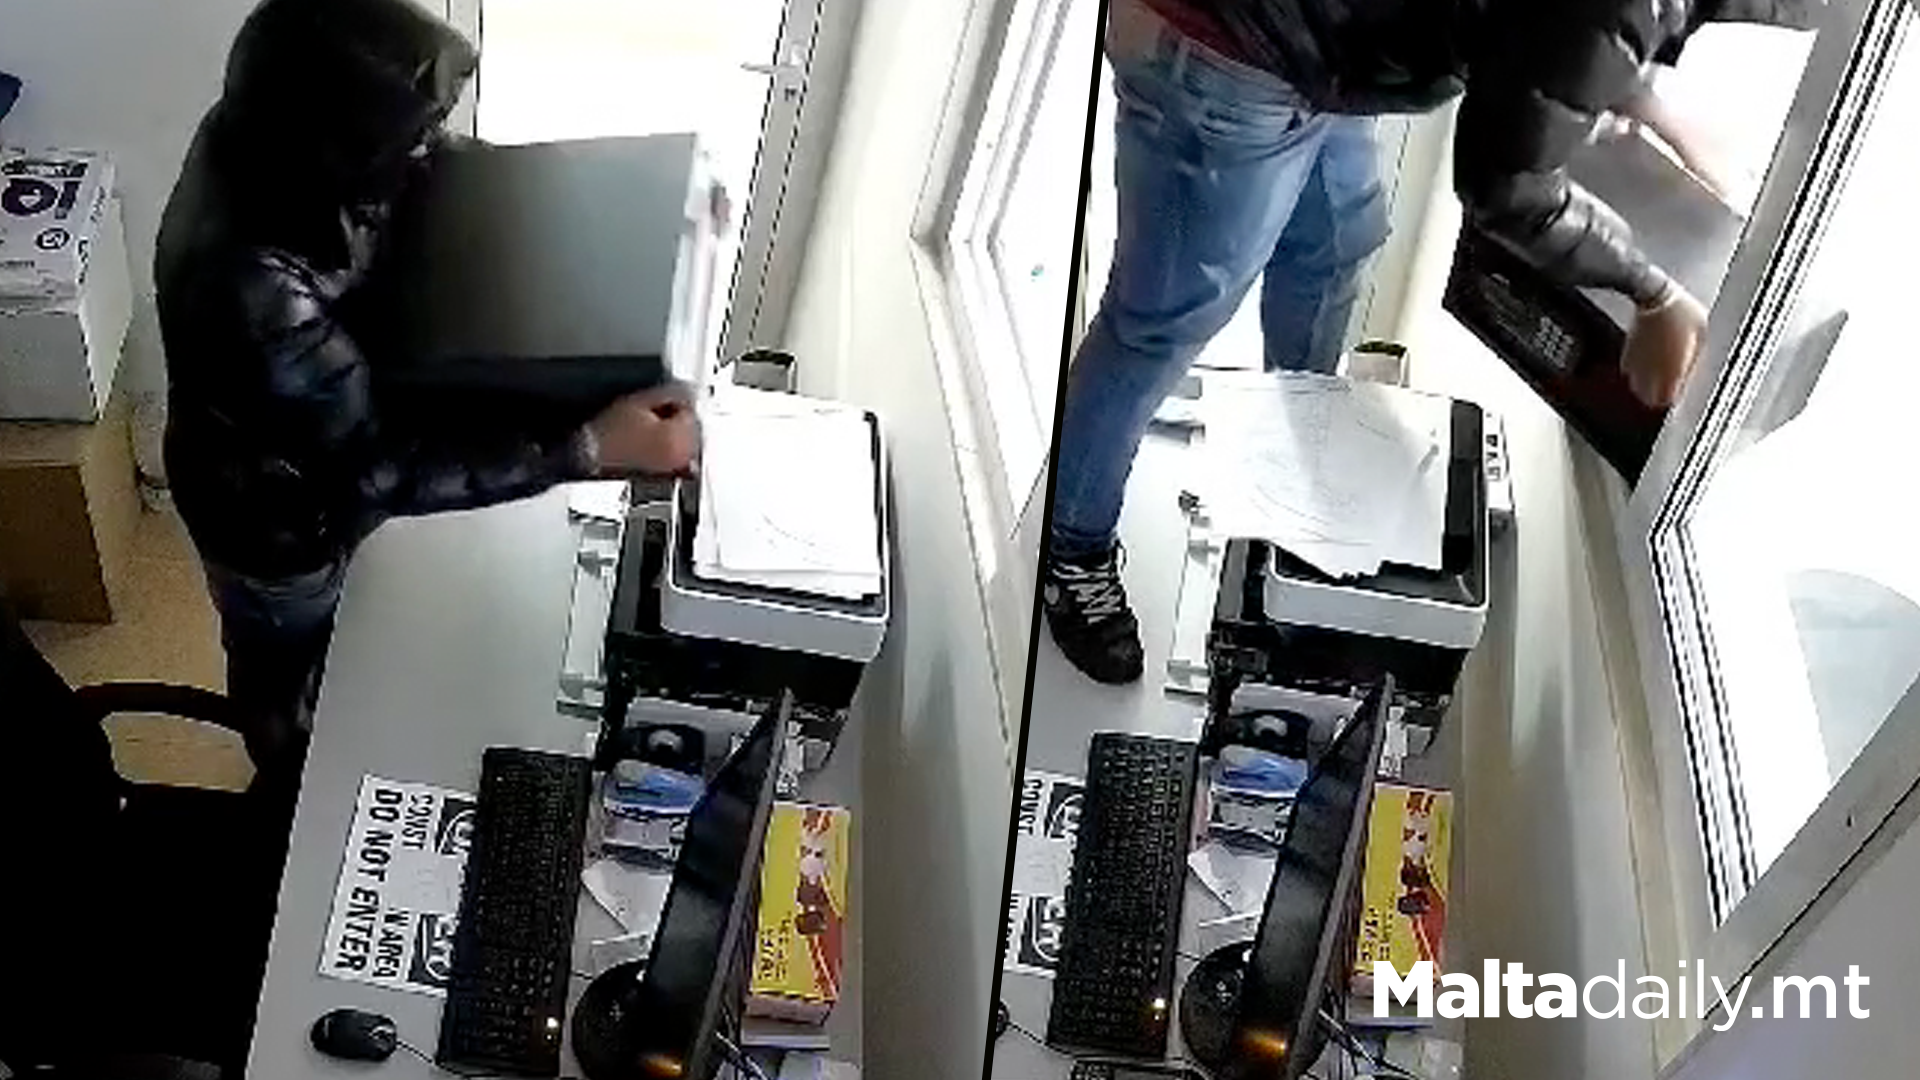 Safe With €9,500 & Tech Stolen From Miami Apartments, Paceville